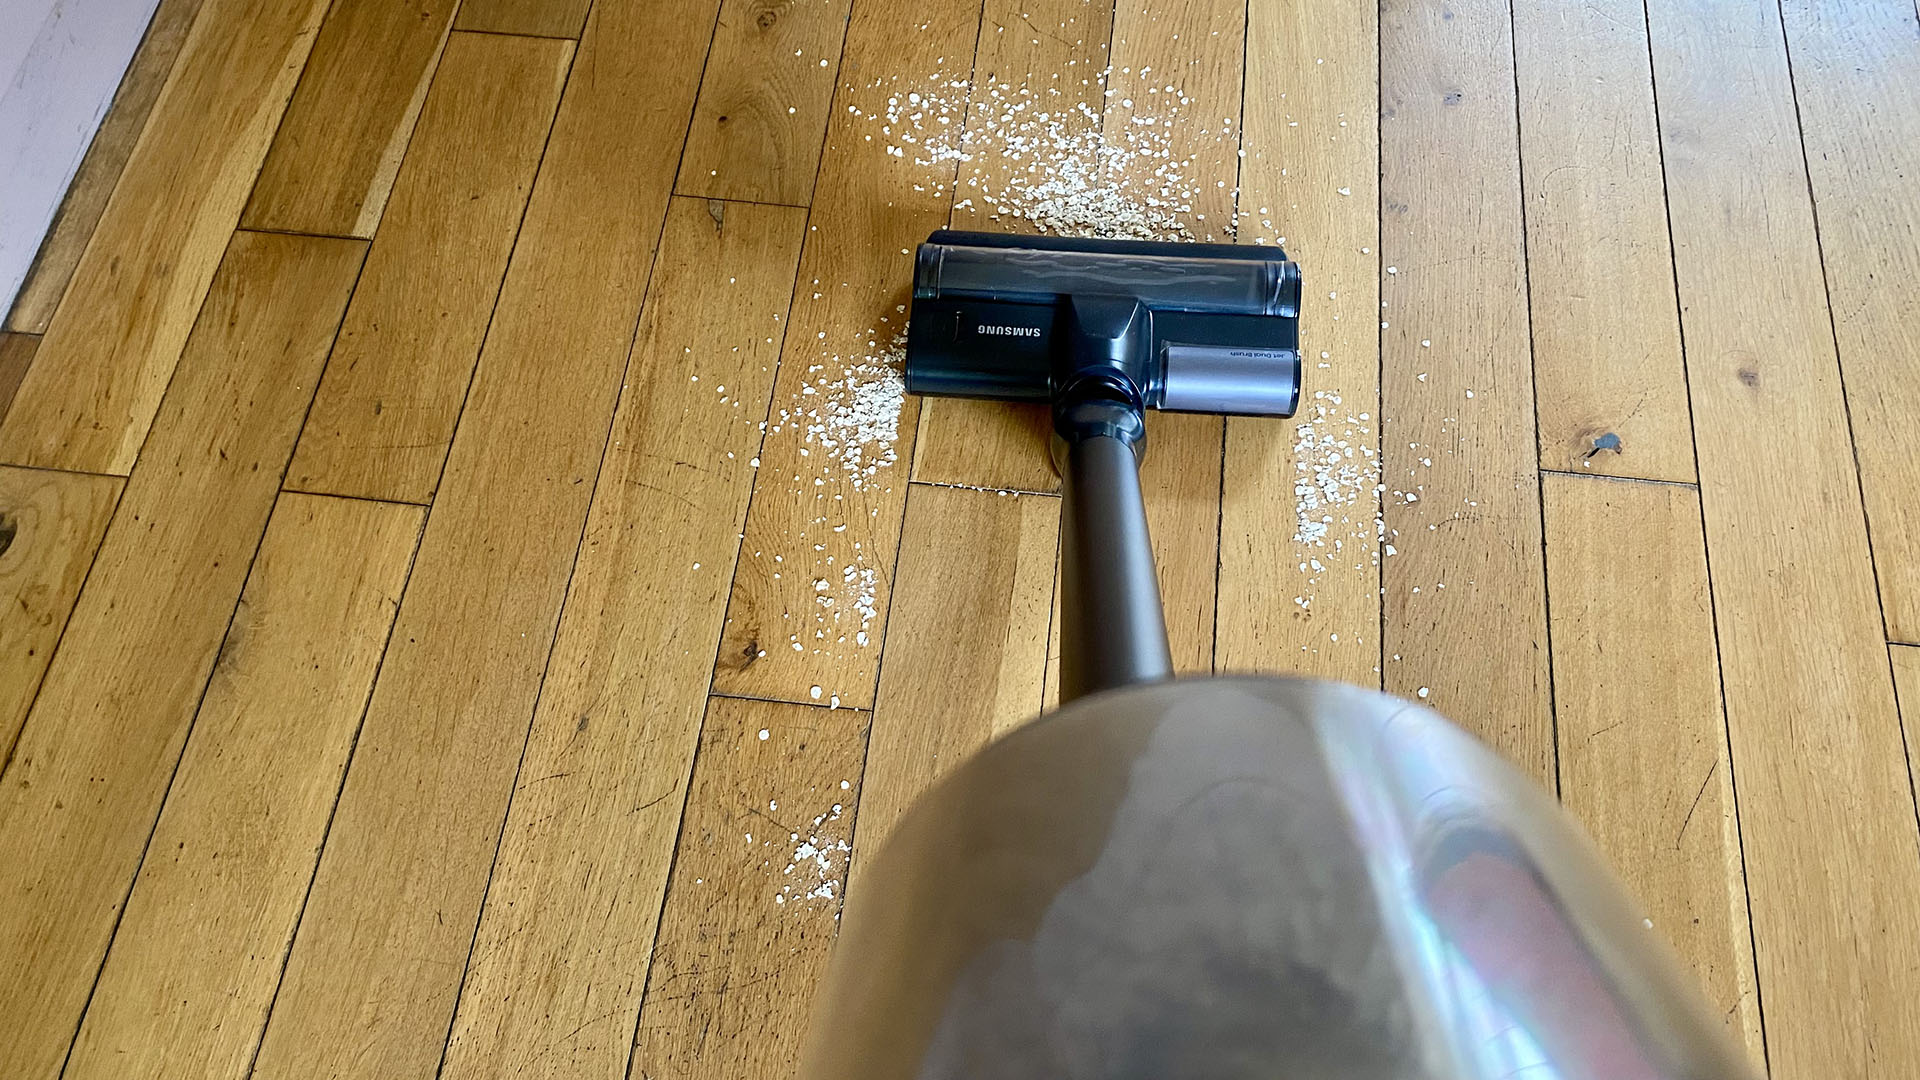 Samsung Jet 85 Pet vacuum cleaner, about to suck up some oats on a hardwood floor